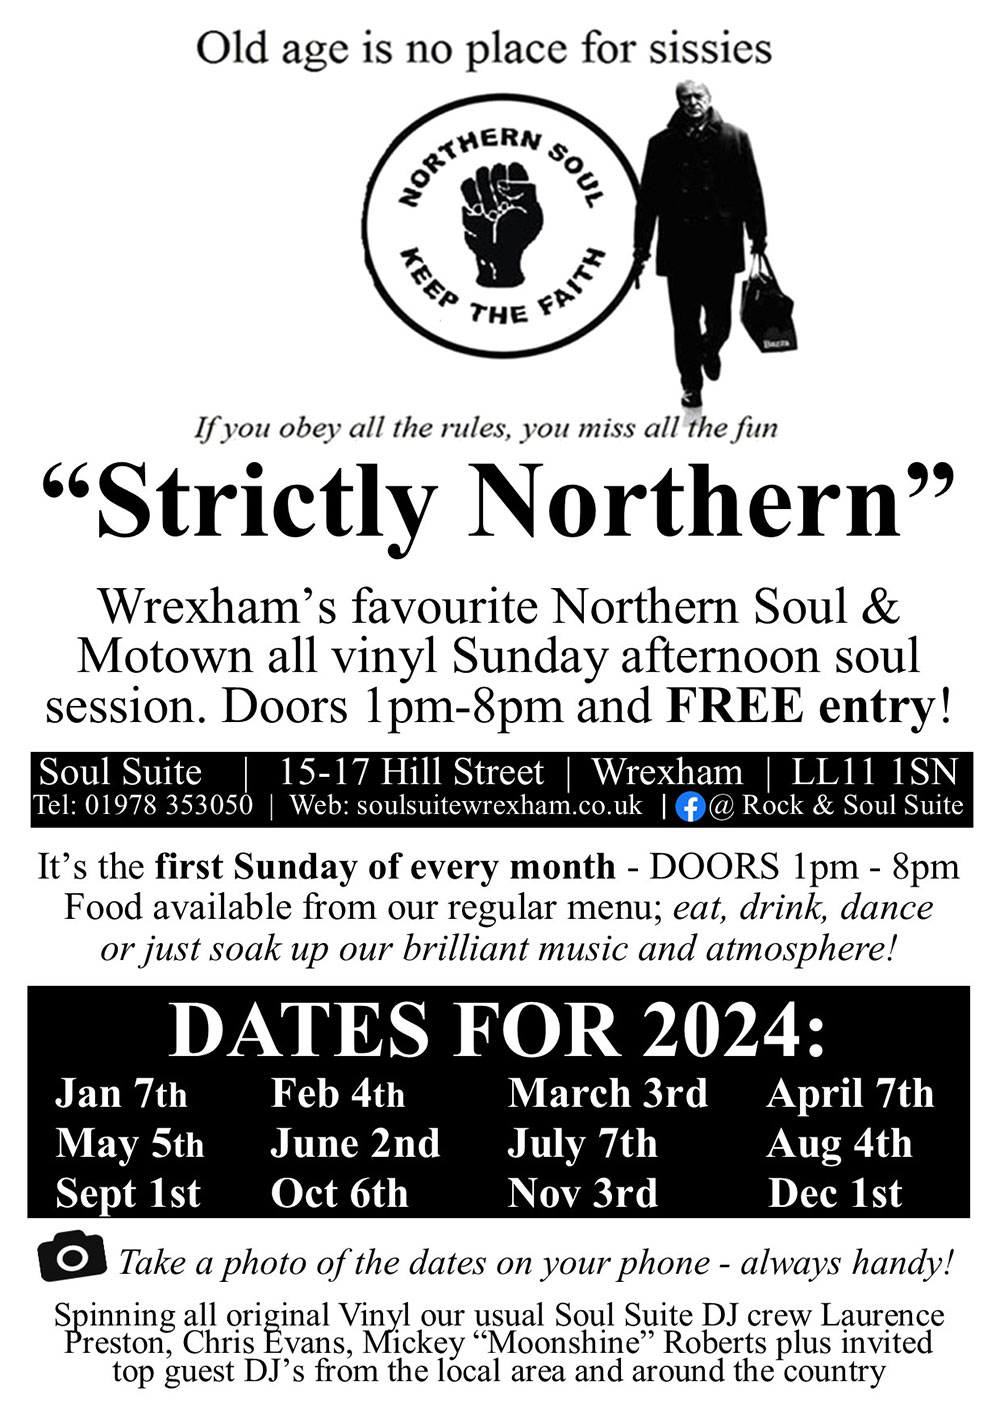 'Strictly Northern' - Wrexham's favourite Northern Soul & Motown all vinyl Sunday afternoon soul session. Doors 1 - 8pm and FREE entry!